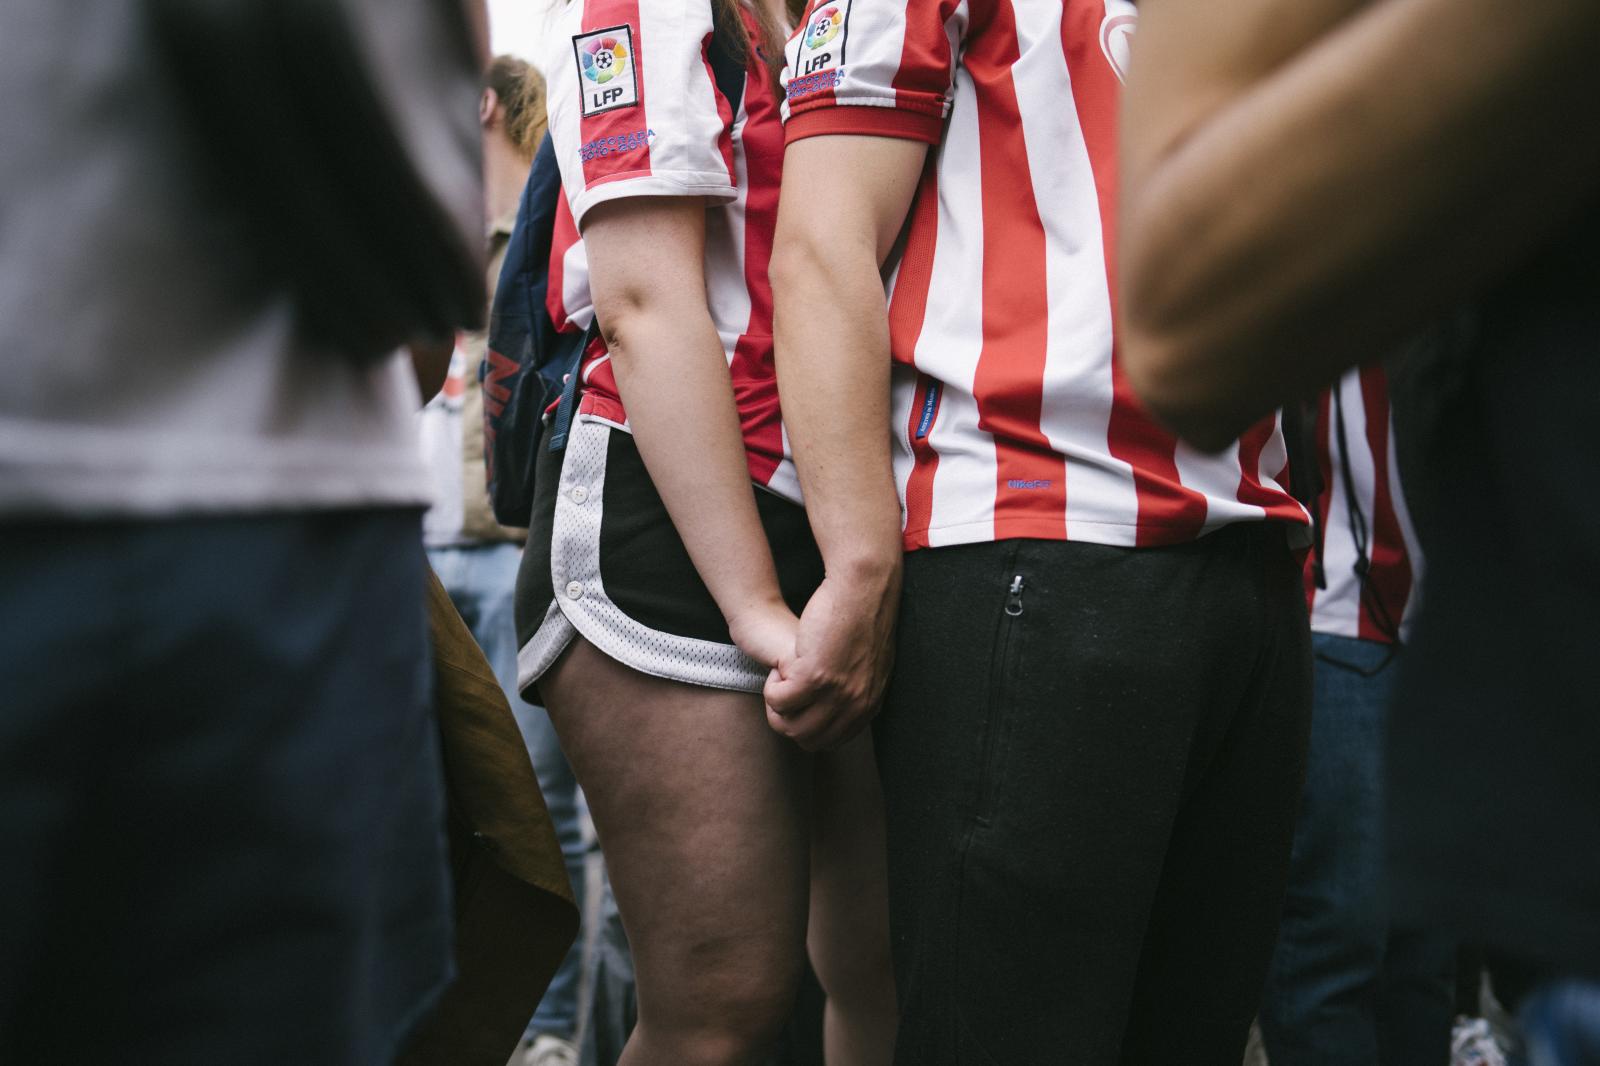 Image from Overview - Two Atletico de Madrid fans hold hands during the Spanish...